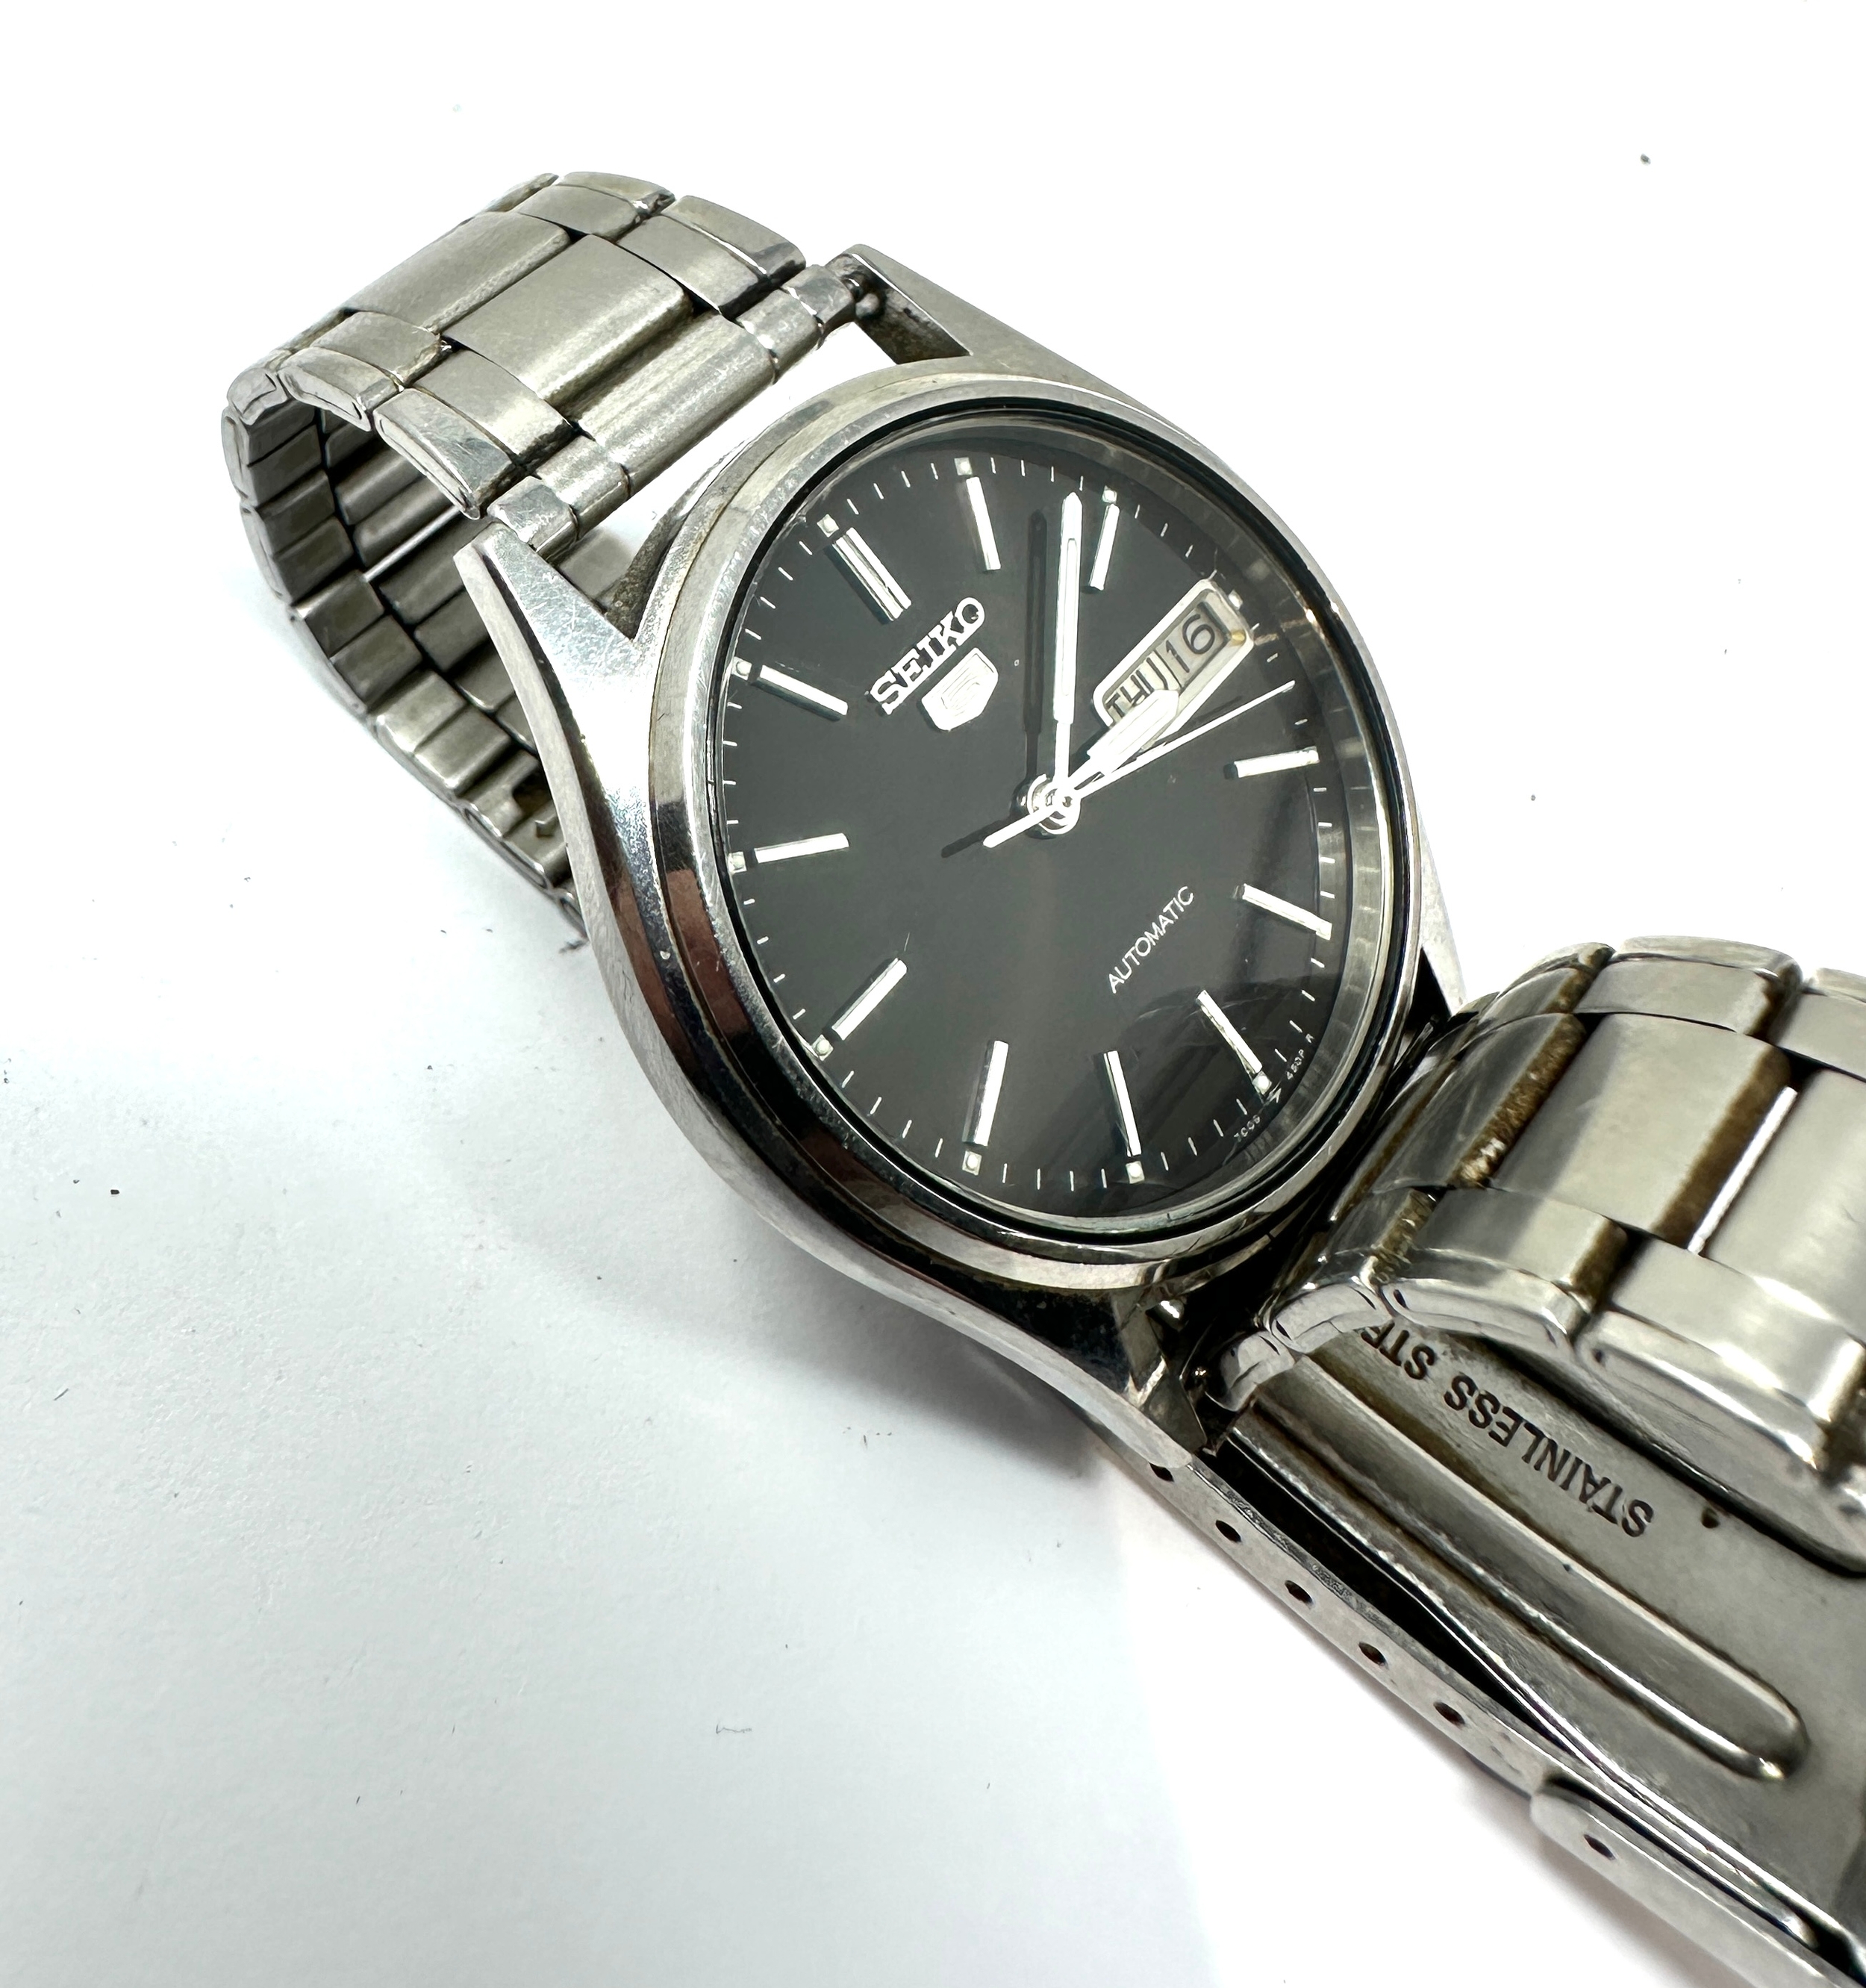 Vintage Seiko 5 Automatic Day & Date 7009 -3100 the watch is ticking black dial - Image 3 of 4